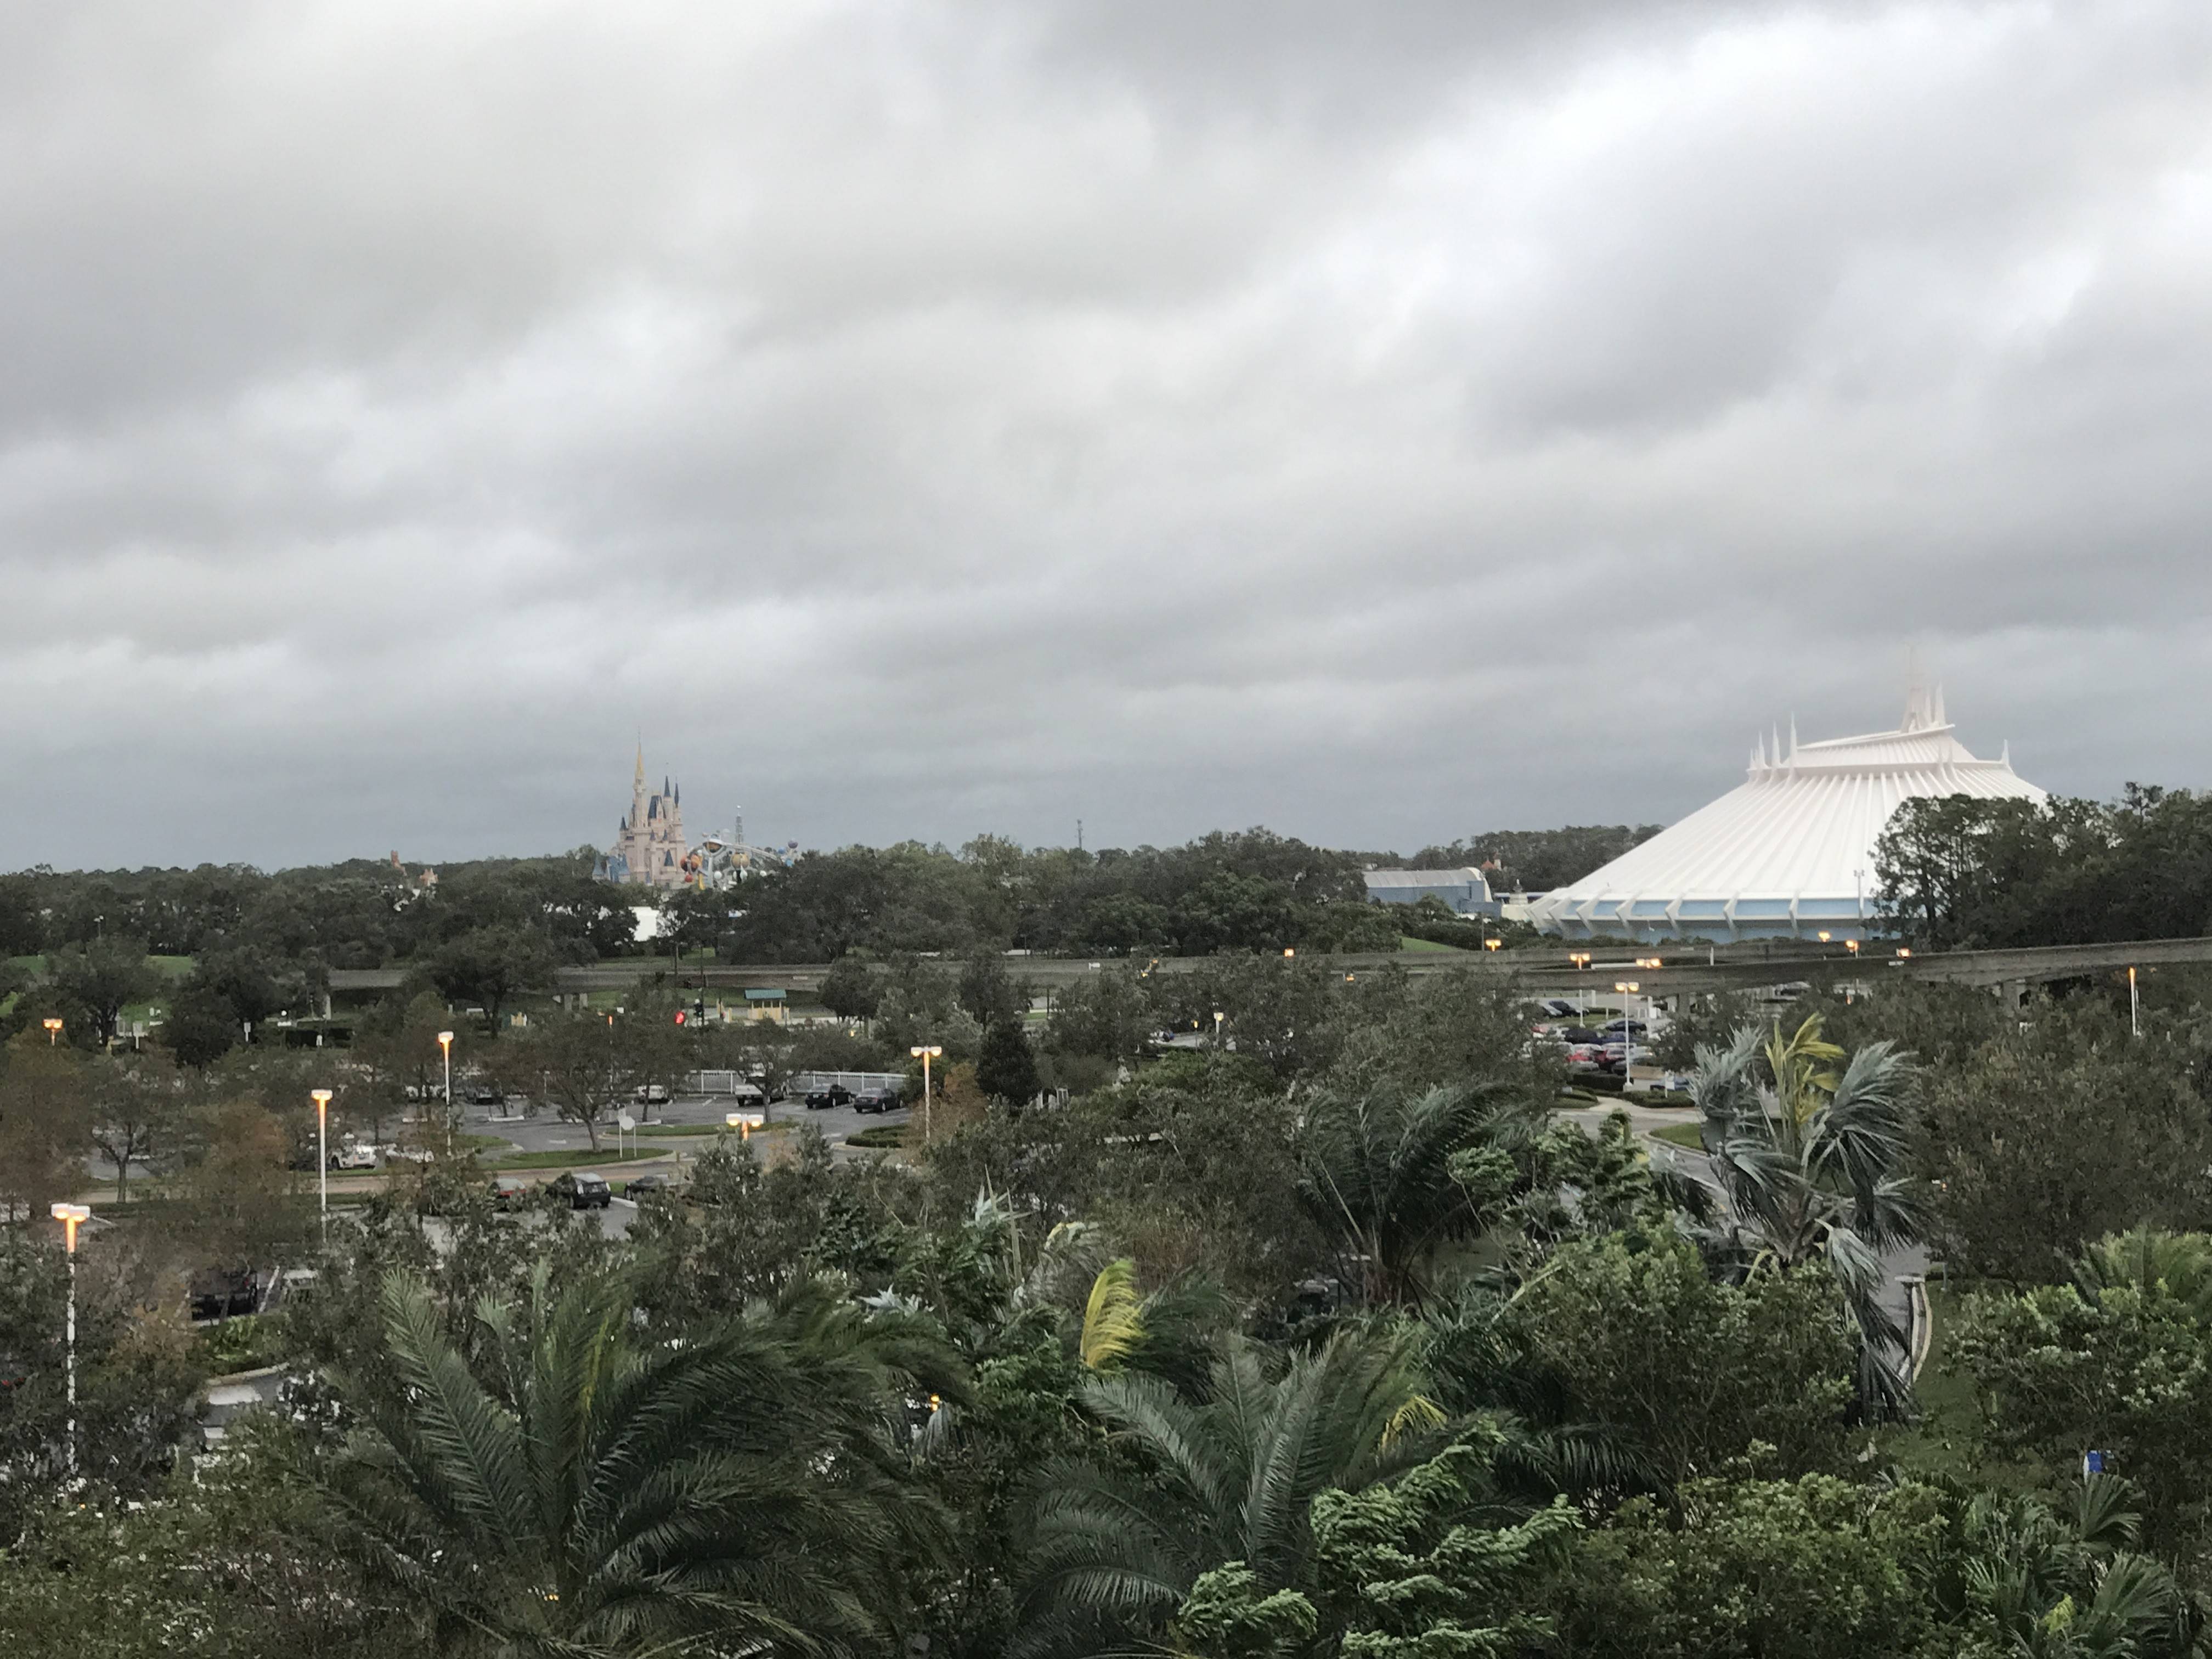 Magic Kingdom post-Irma in 2017 viewed from the Contemporary. Photo by @andysol